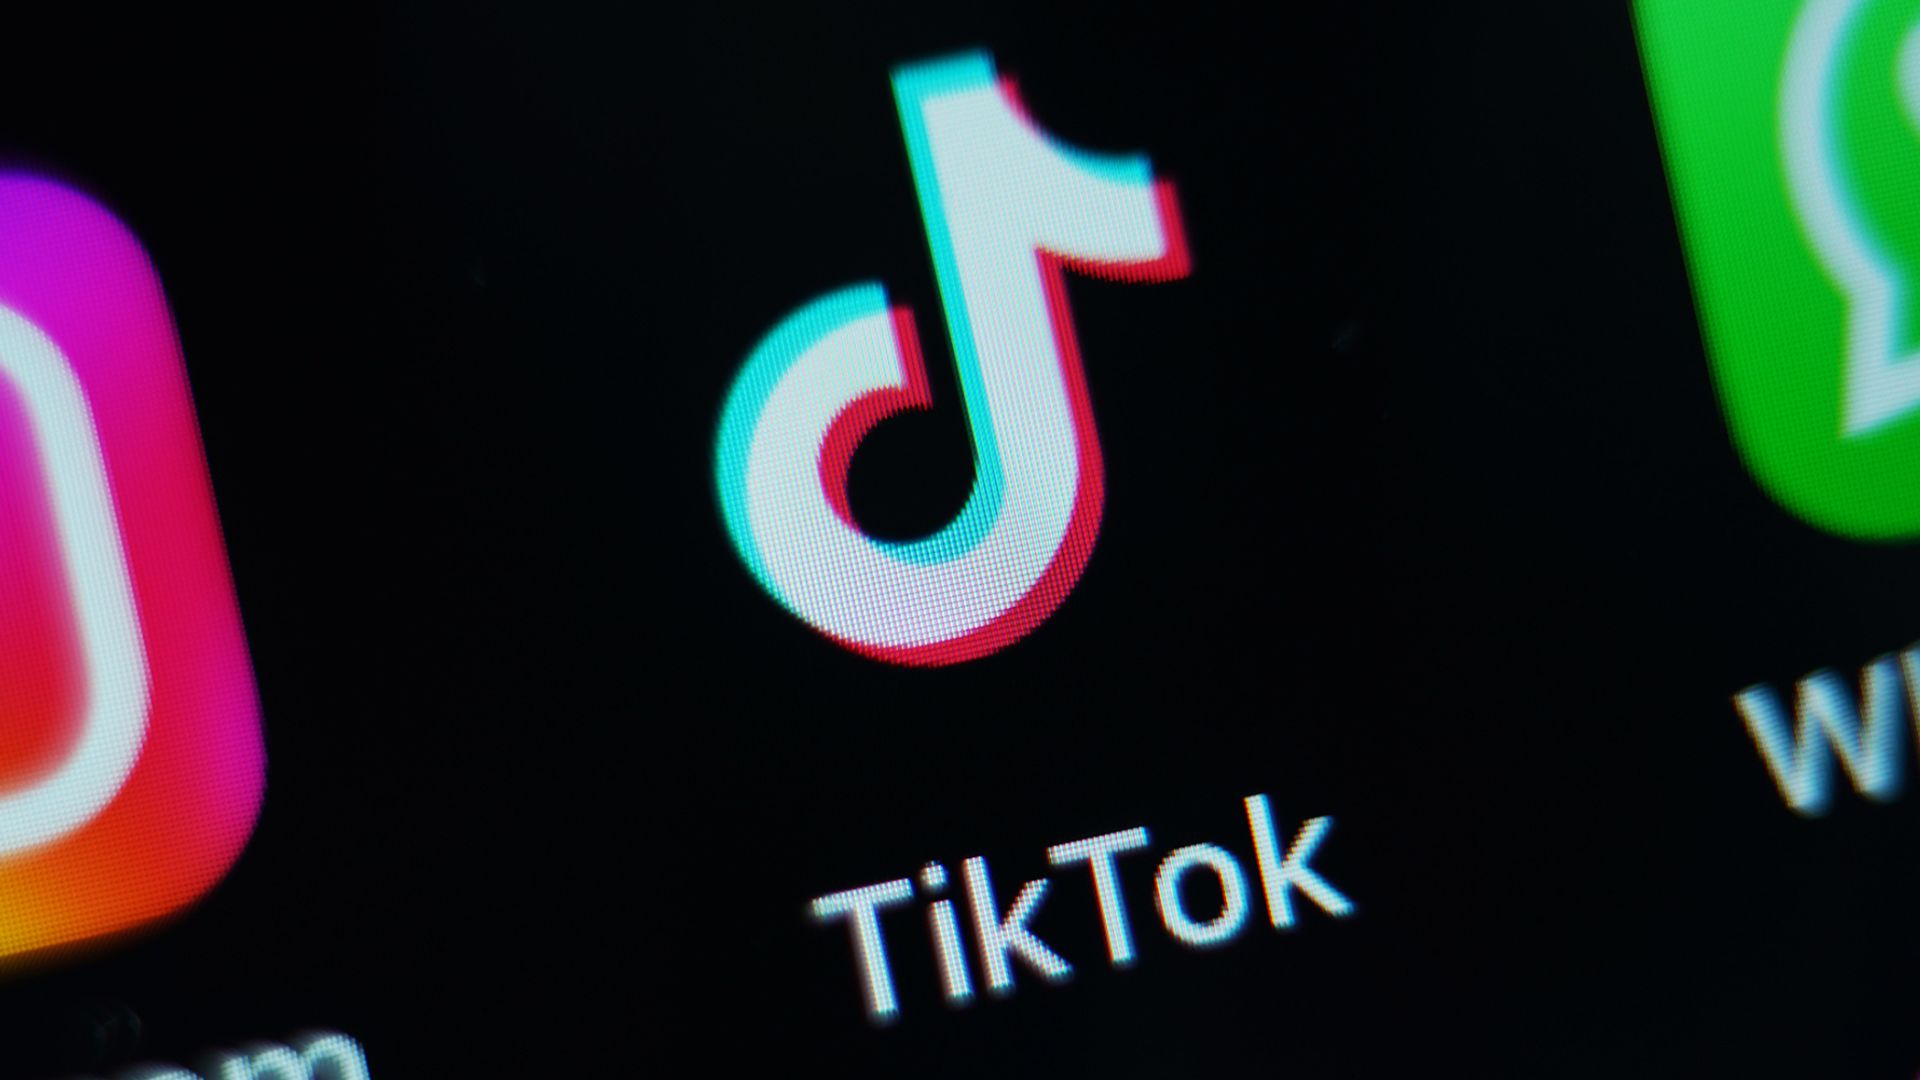 'We aren't going anywhere' - TikTok vows court fight as new US law threatens to ban it